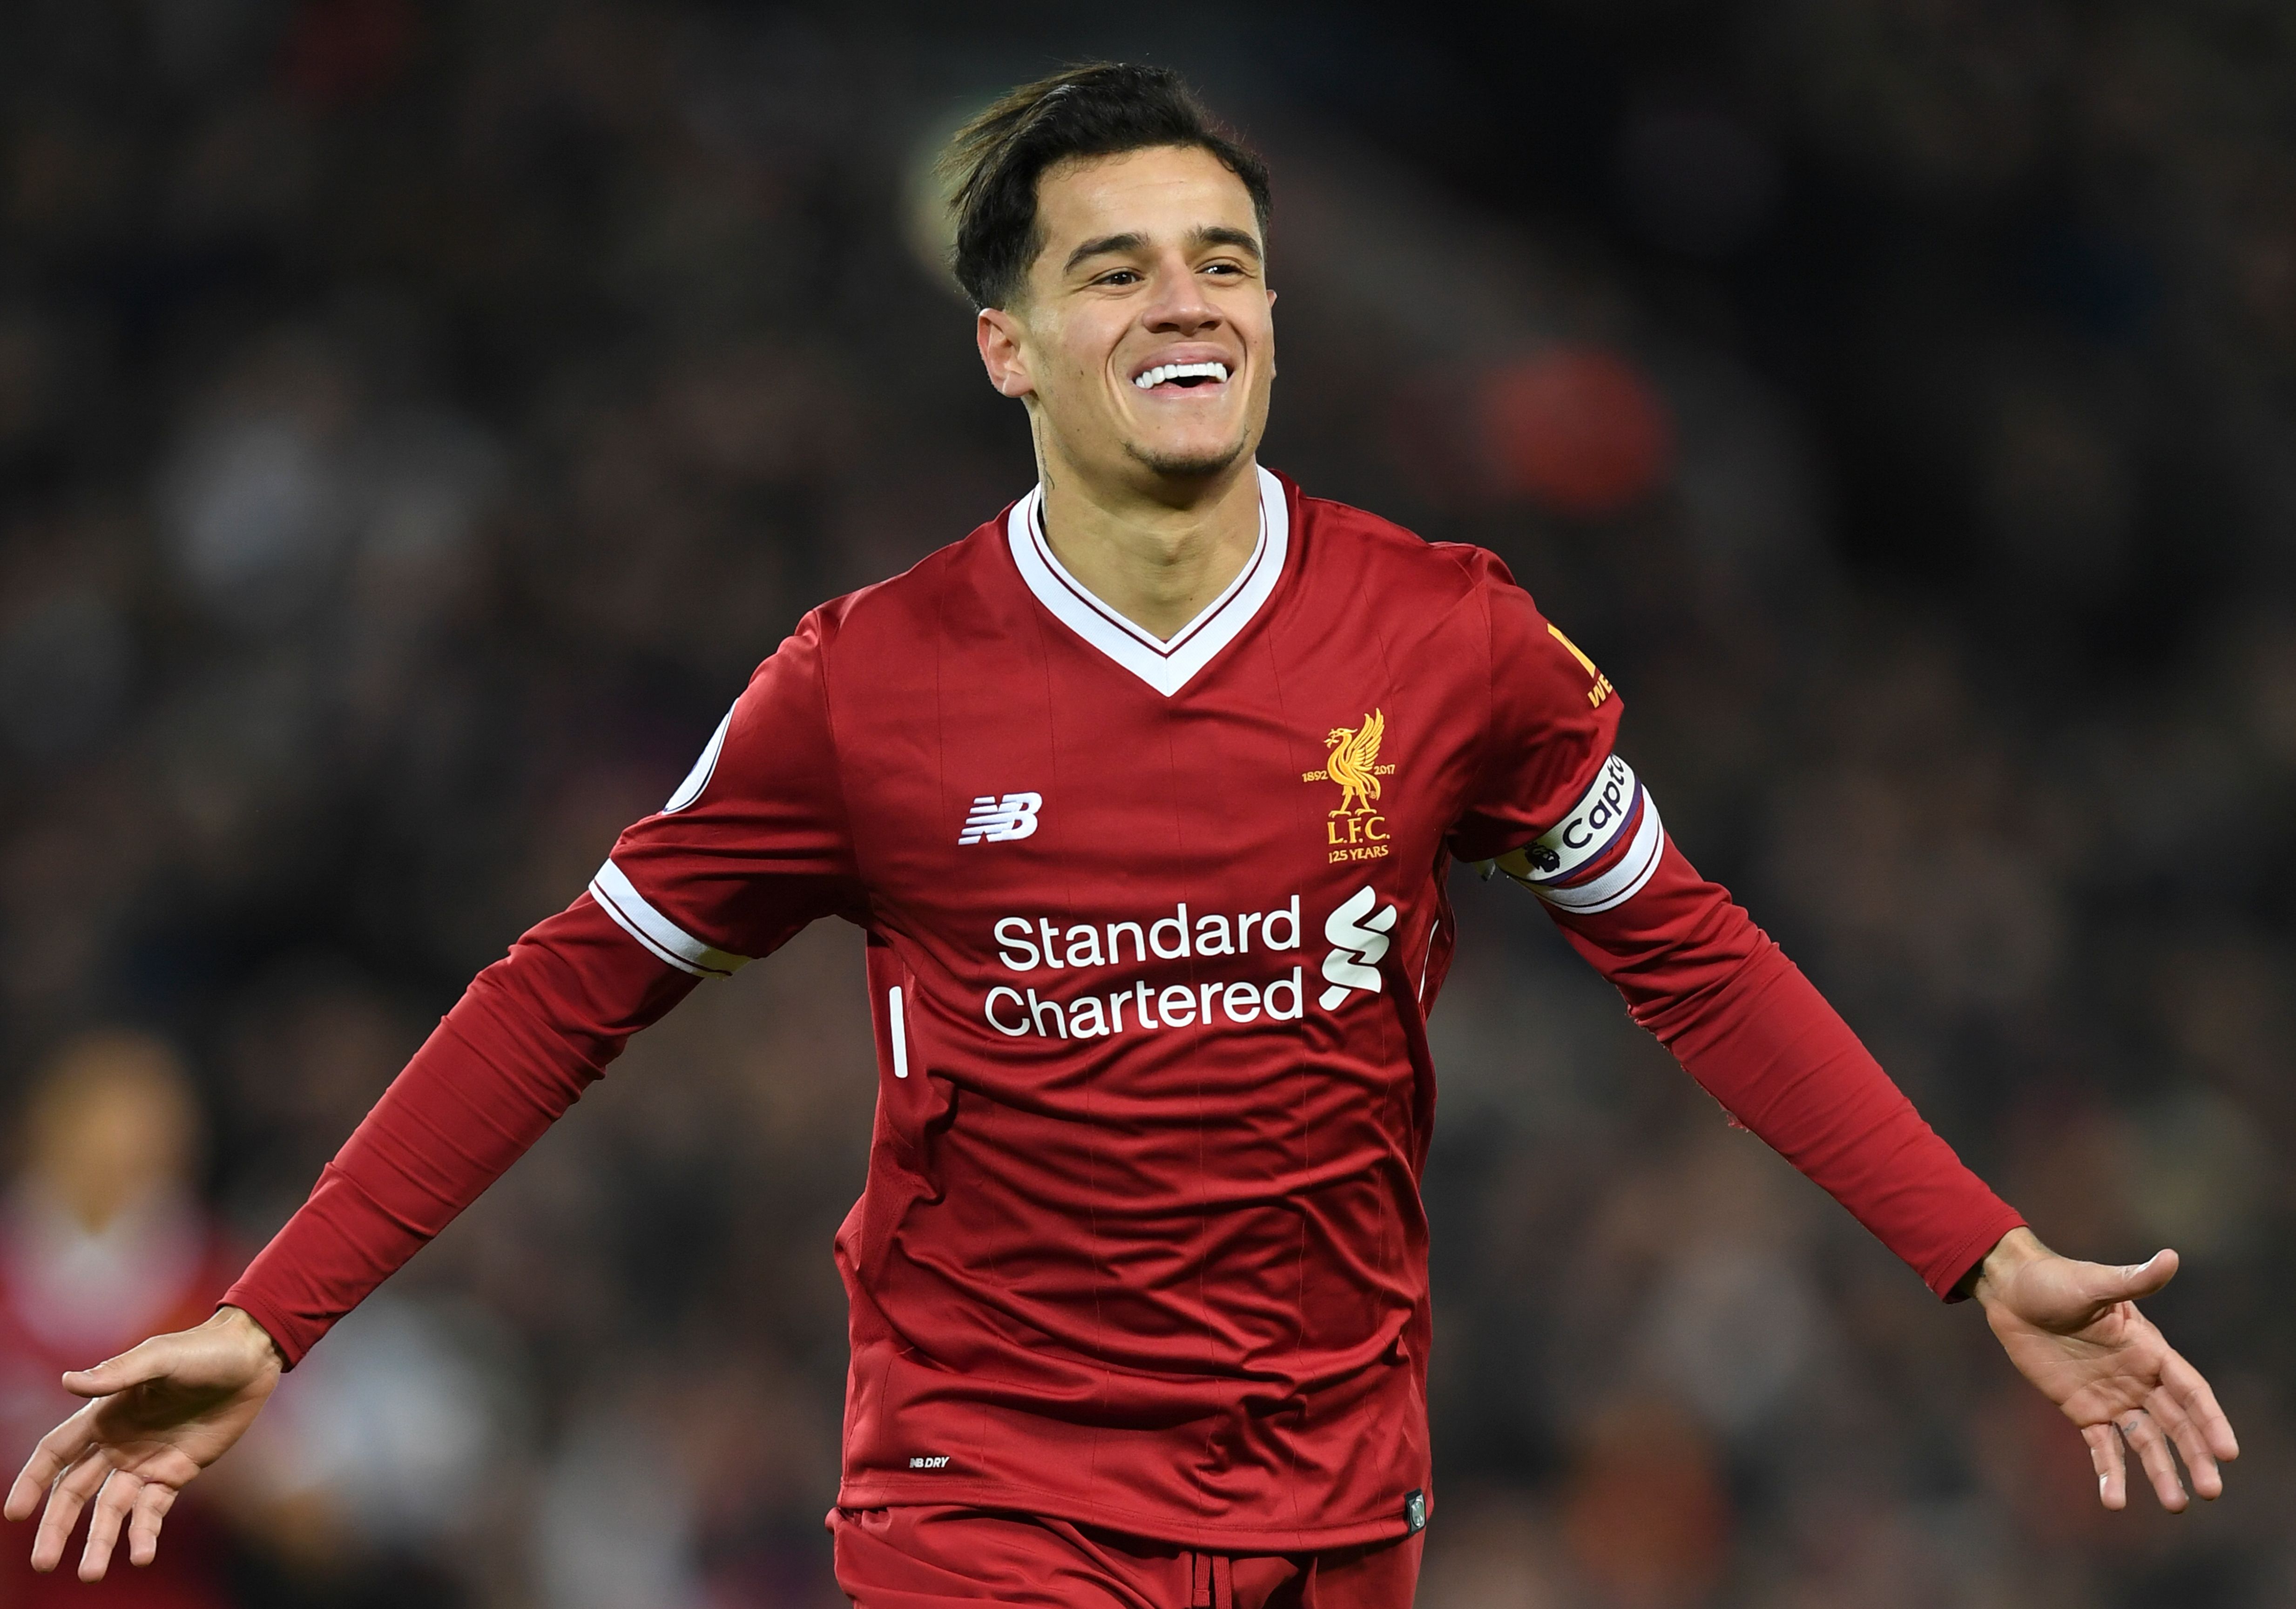 Liverpool legend believes Arne Slot has found the new Coutinho